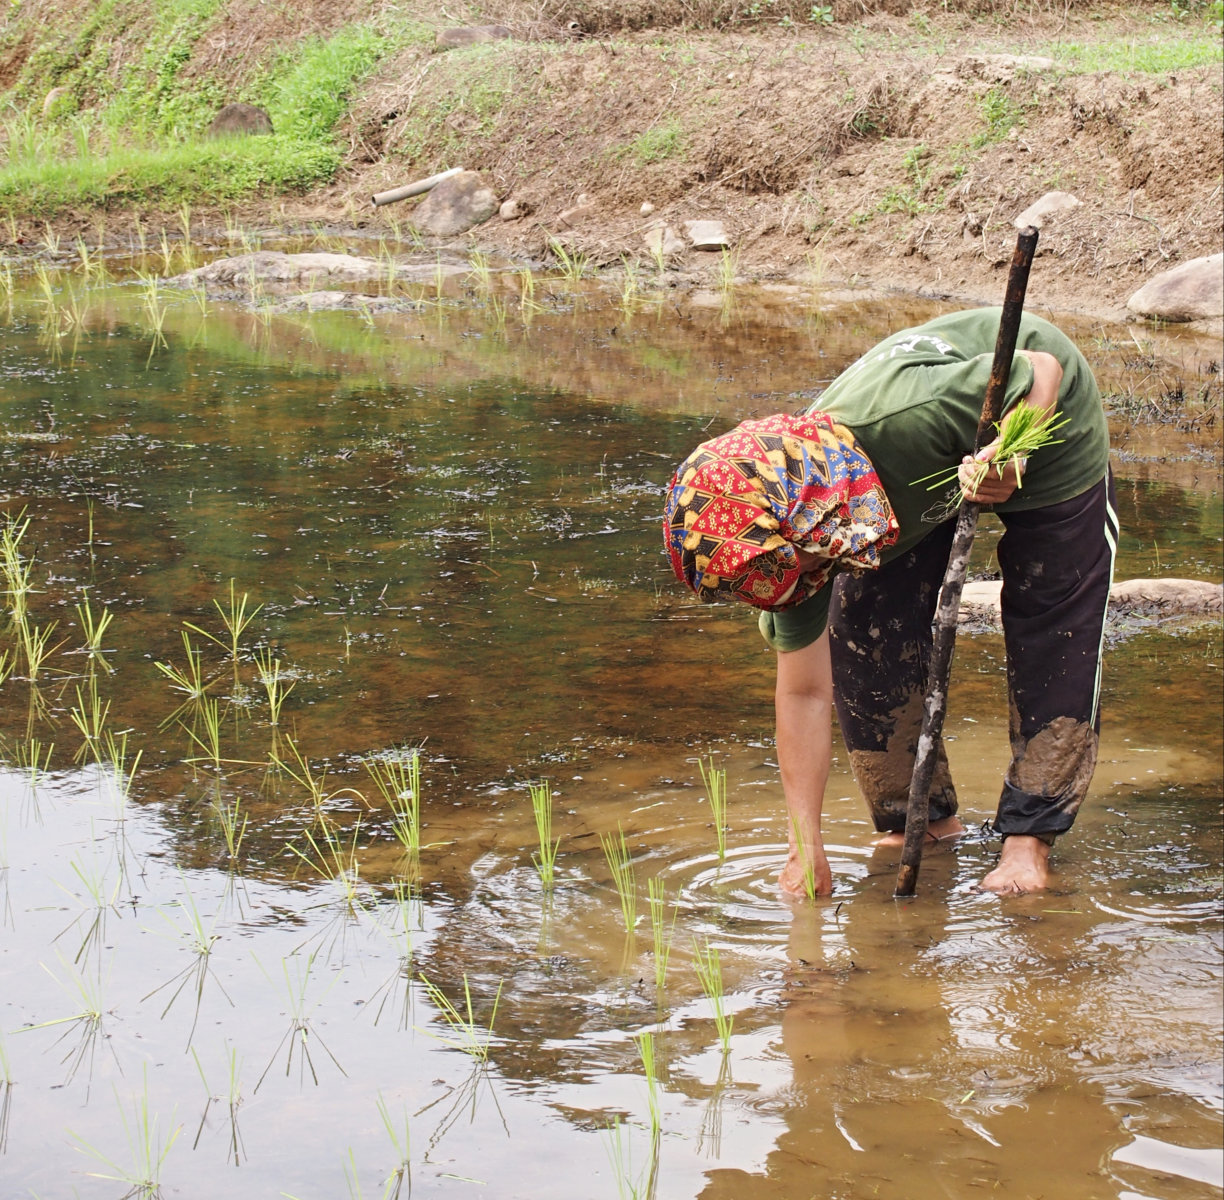 Rice planting in Borneo. Photo by E. Gasiunaite